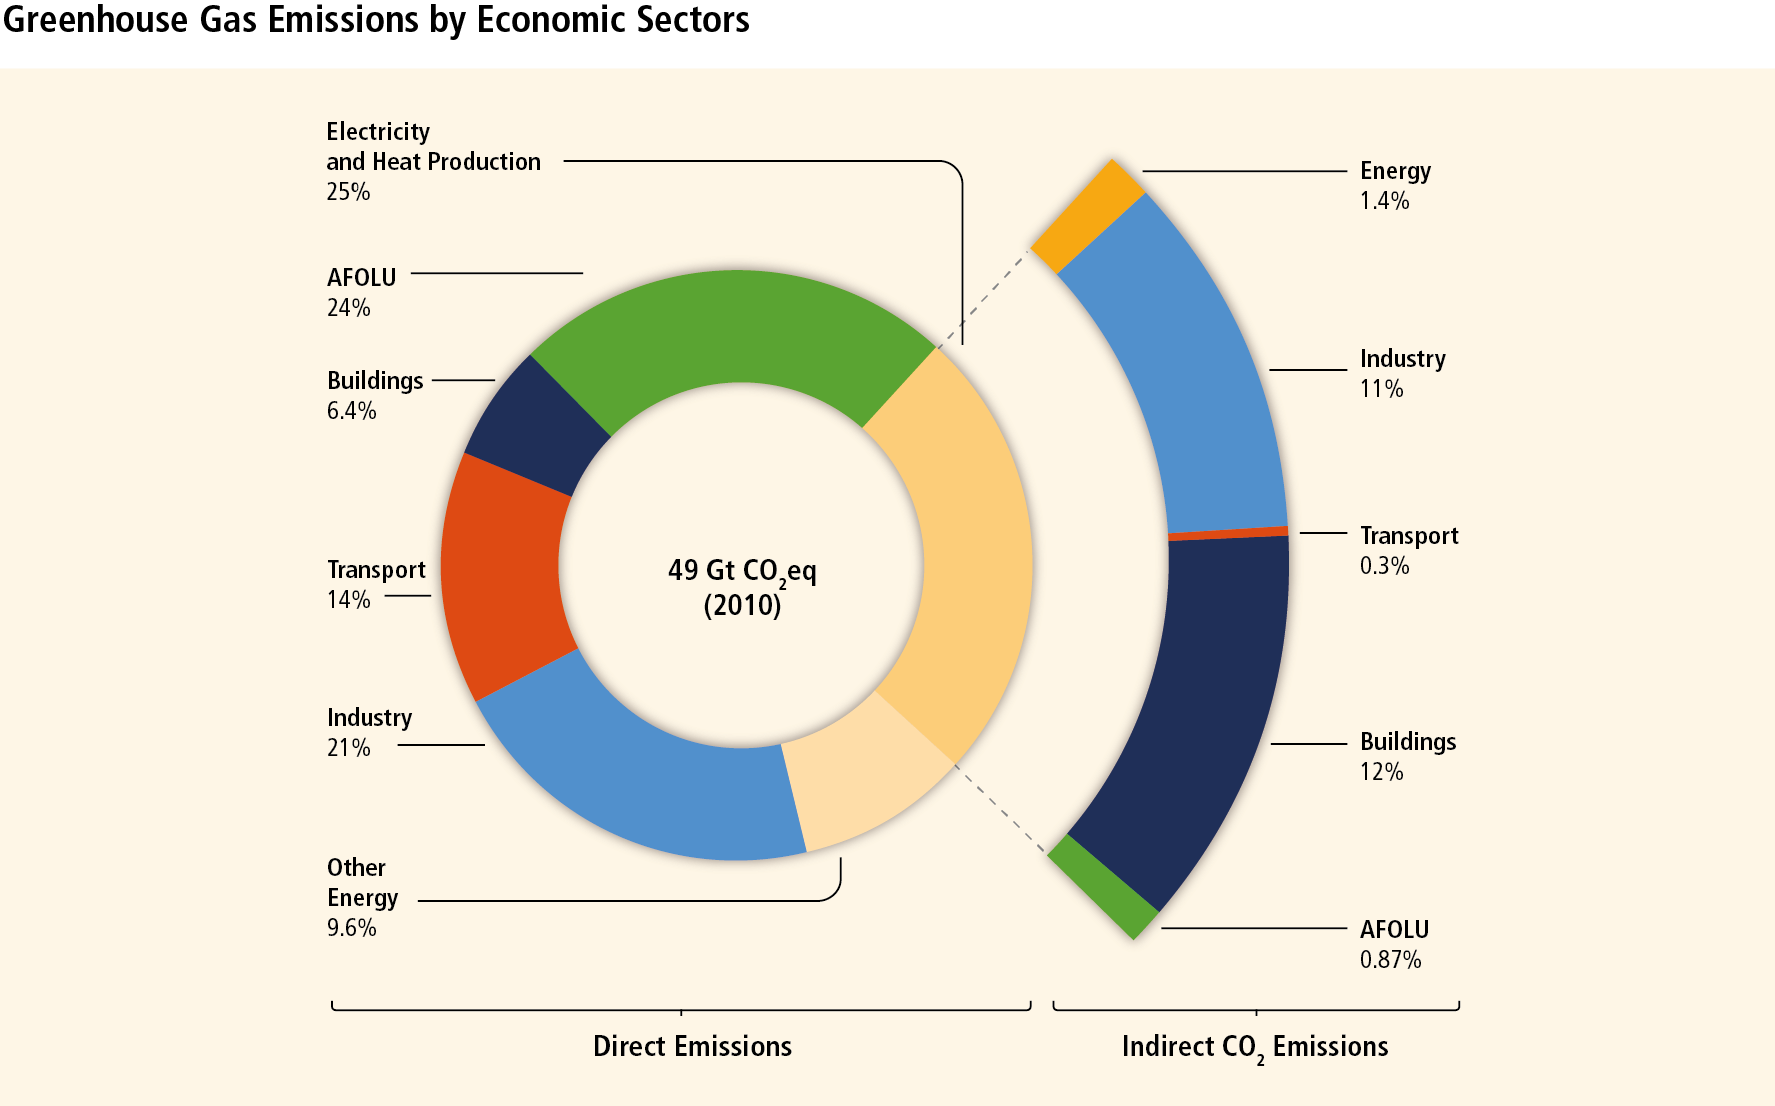 Chart showing the human-made greenhouse gas emissions. The biggest emissions come from electricity and heat production (25%), agriculture, forestry and other land use (24%), industry (21%), and transport (14%).